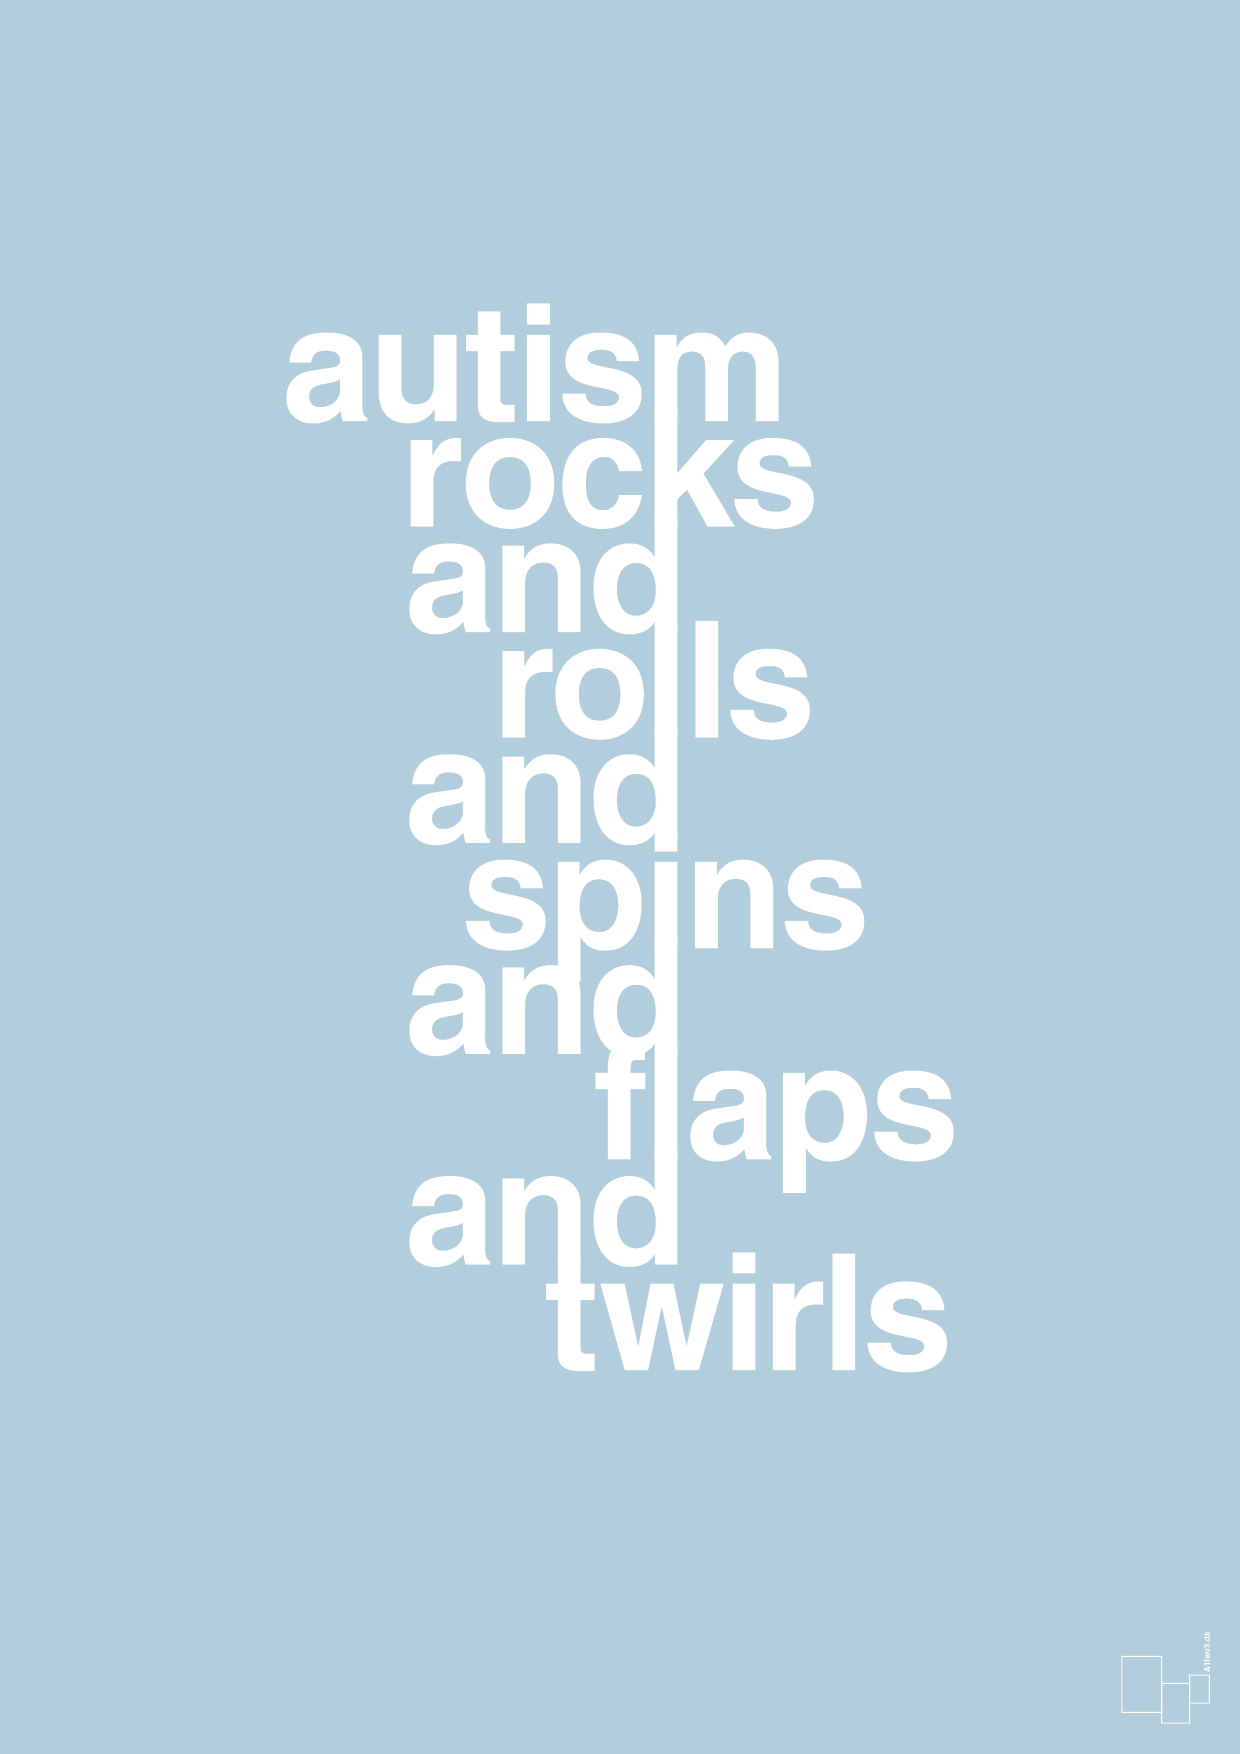 autism rocks and rolls and spins and flaps and twirls - Plakat med Samfund i Heavenly Blue